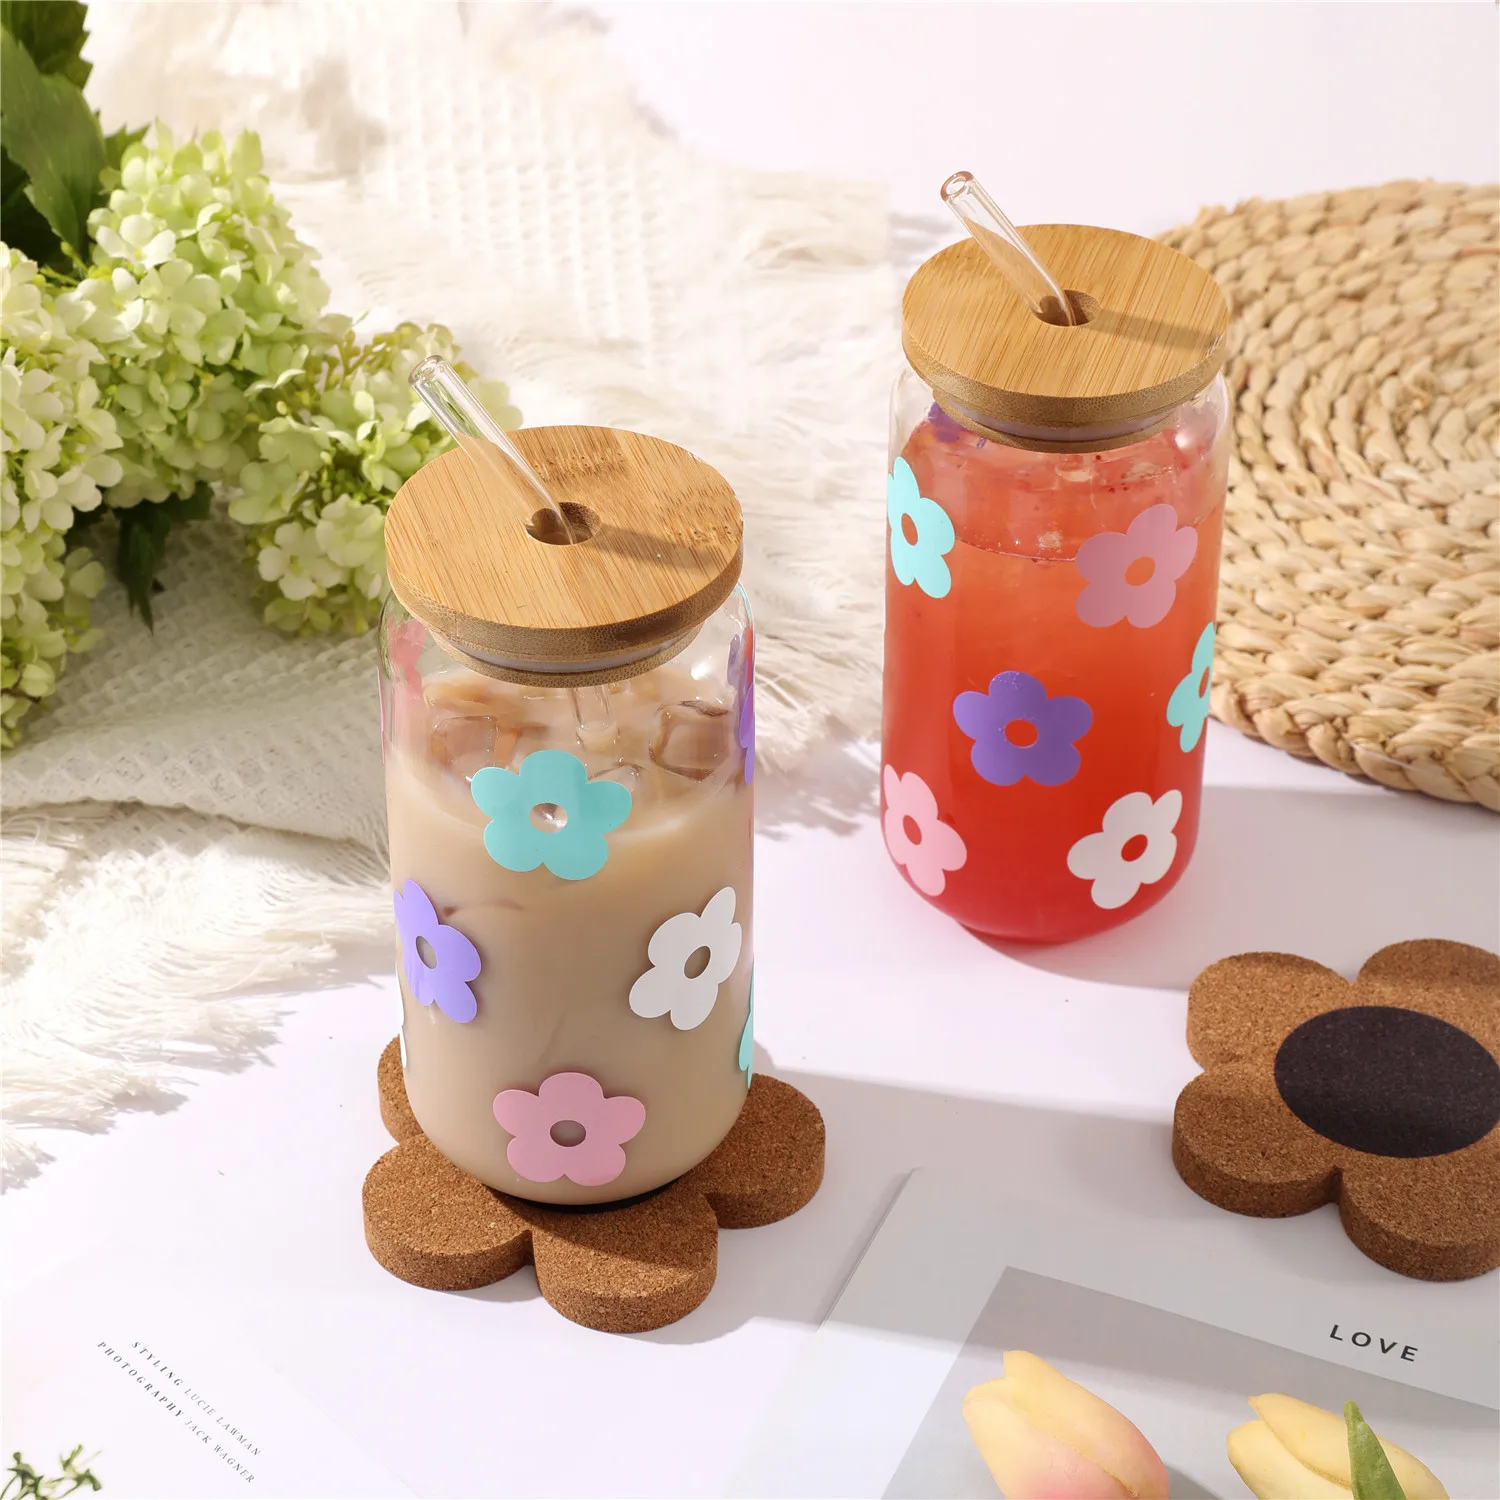 https://ae01.alicdn.com/kf/A268d4f313d5549b4baf06aaaf13afe4fk/16oz-Daisy-Cup-Iced-Coffee-Cup-Glass-With-Bamboo-Lid-Glass-Straw-Flower-Cork-Coaster-Retro.jpg